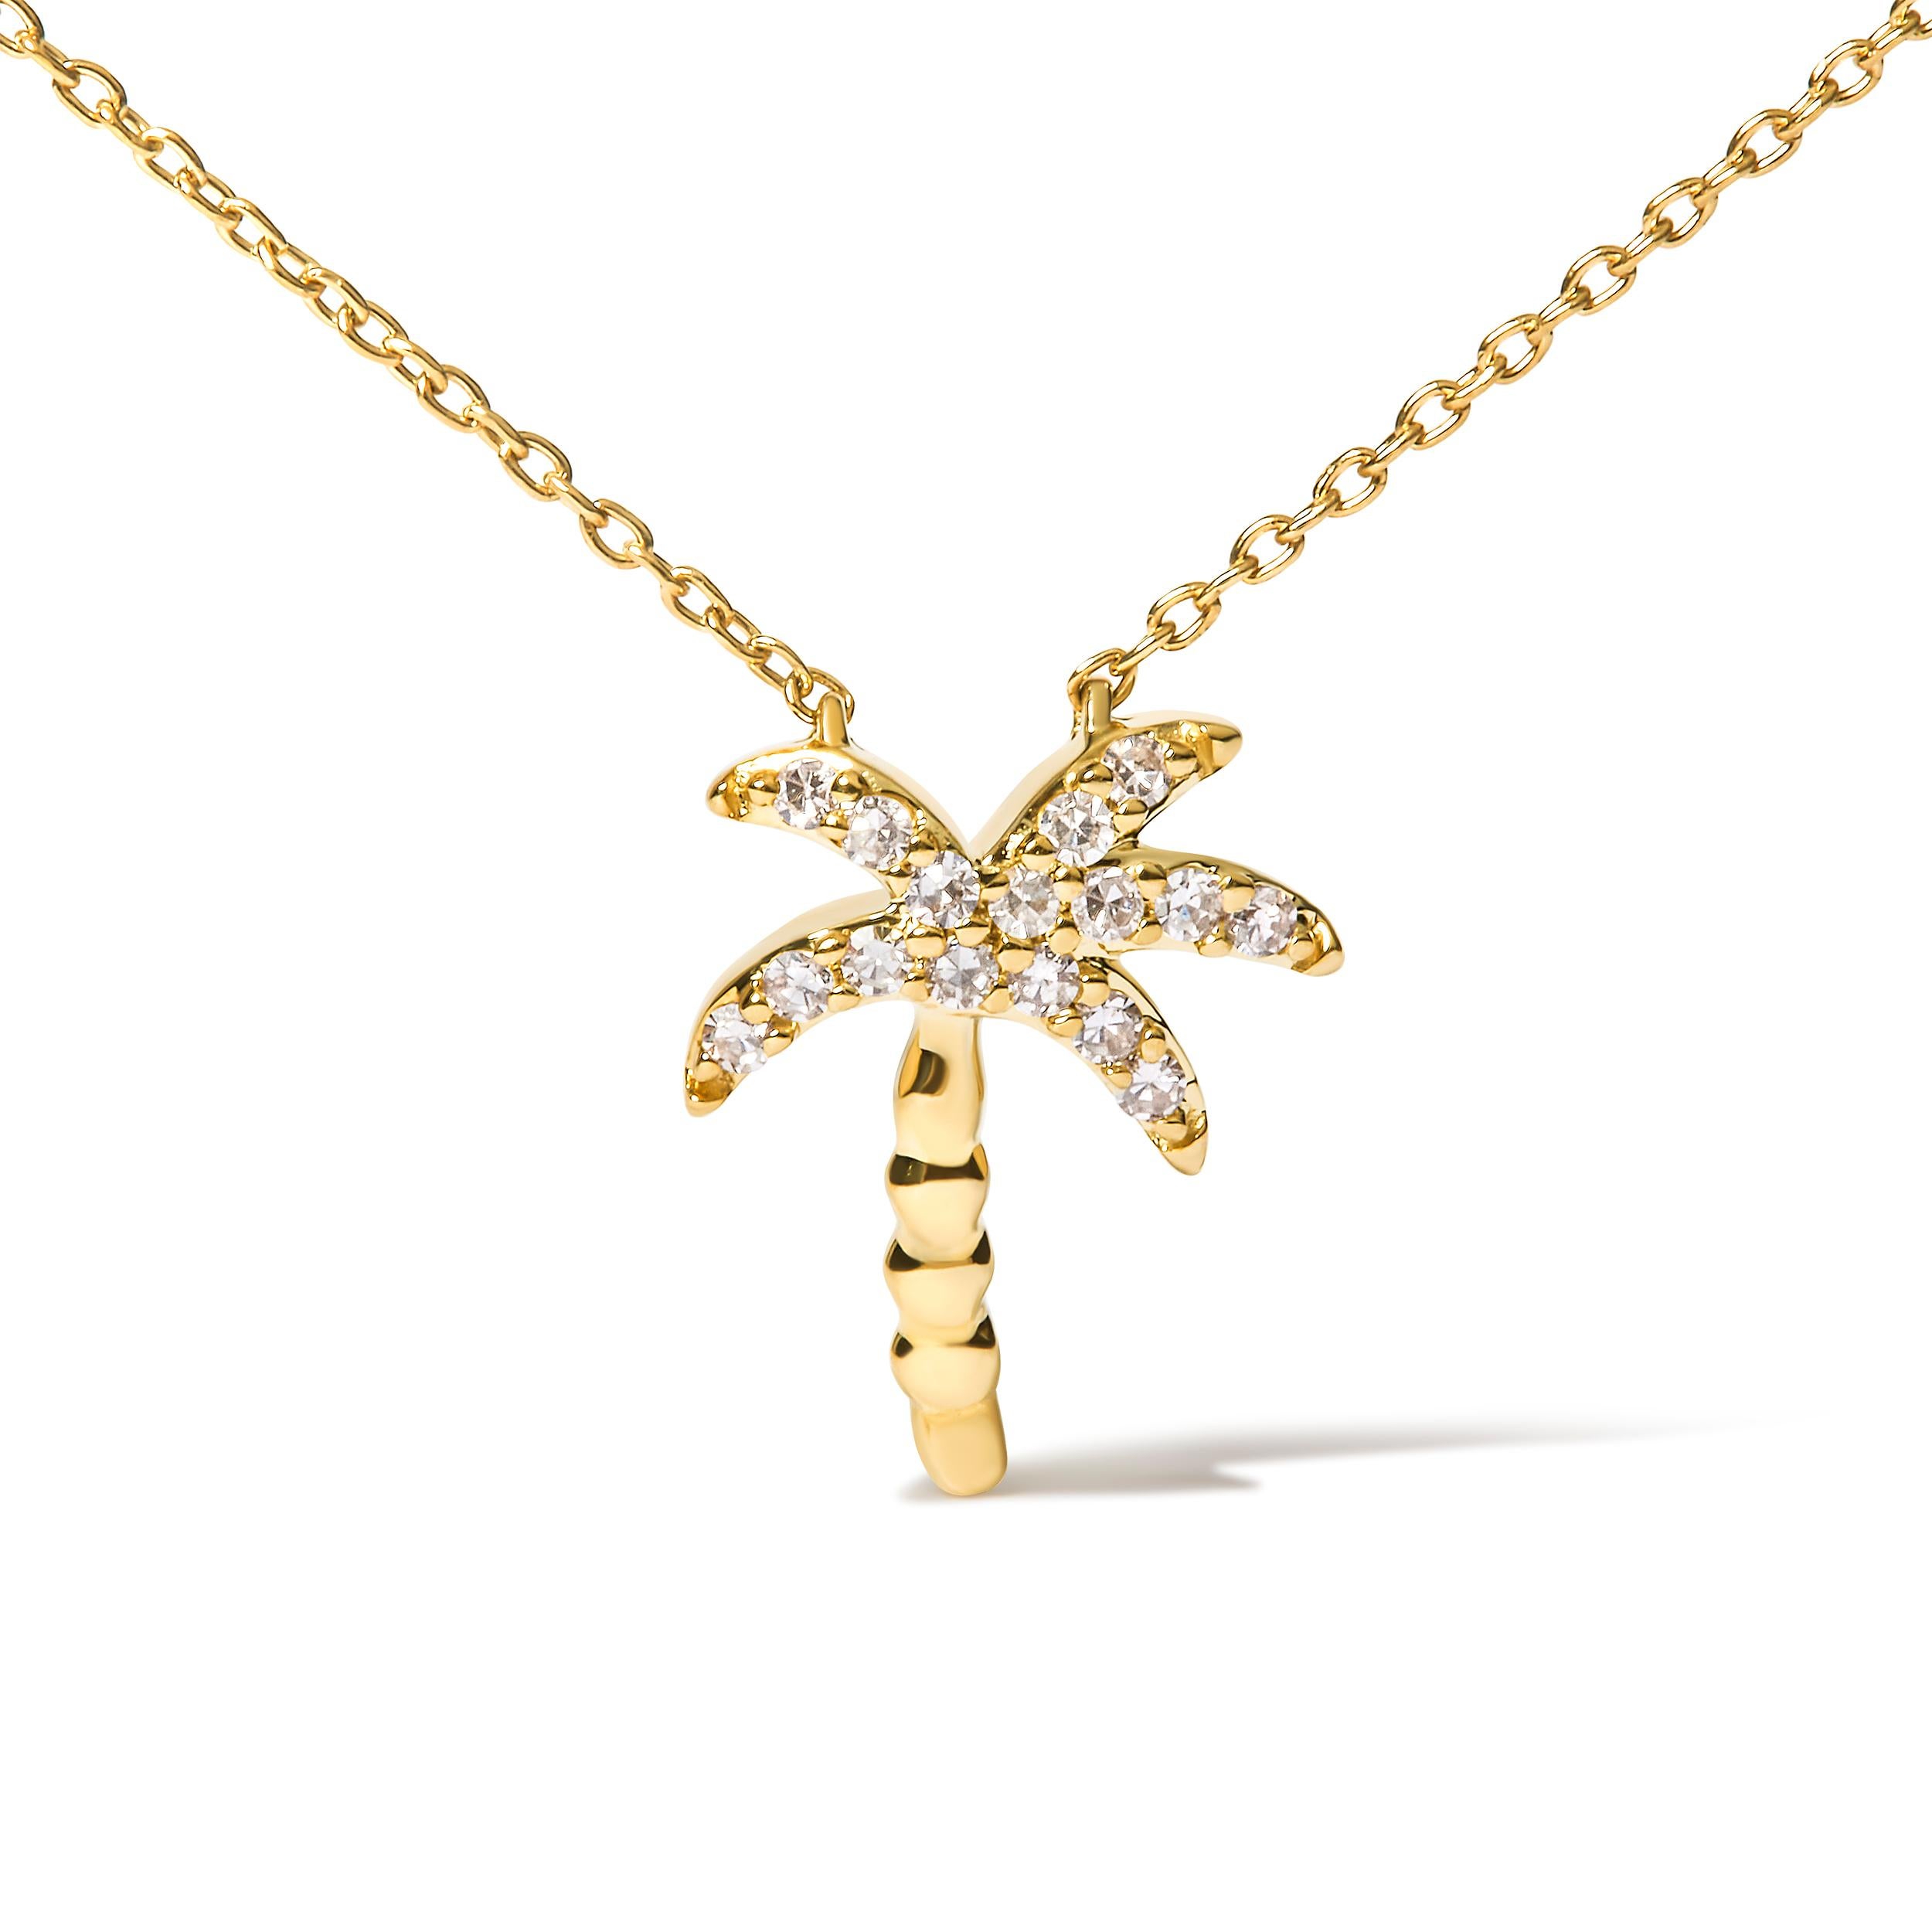 Introducing a dazzling piece that encapsulates the essence of nature's beauty - an 18